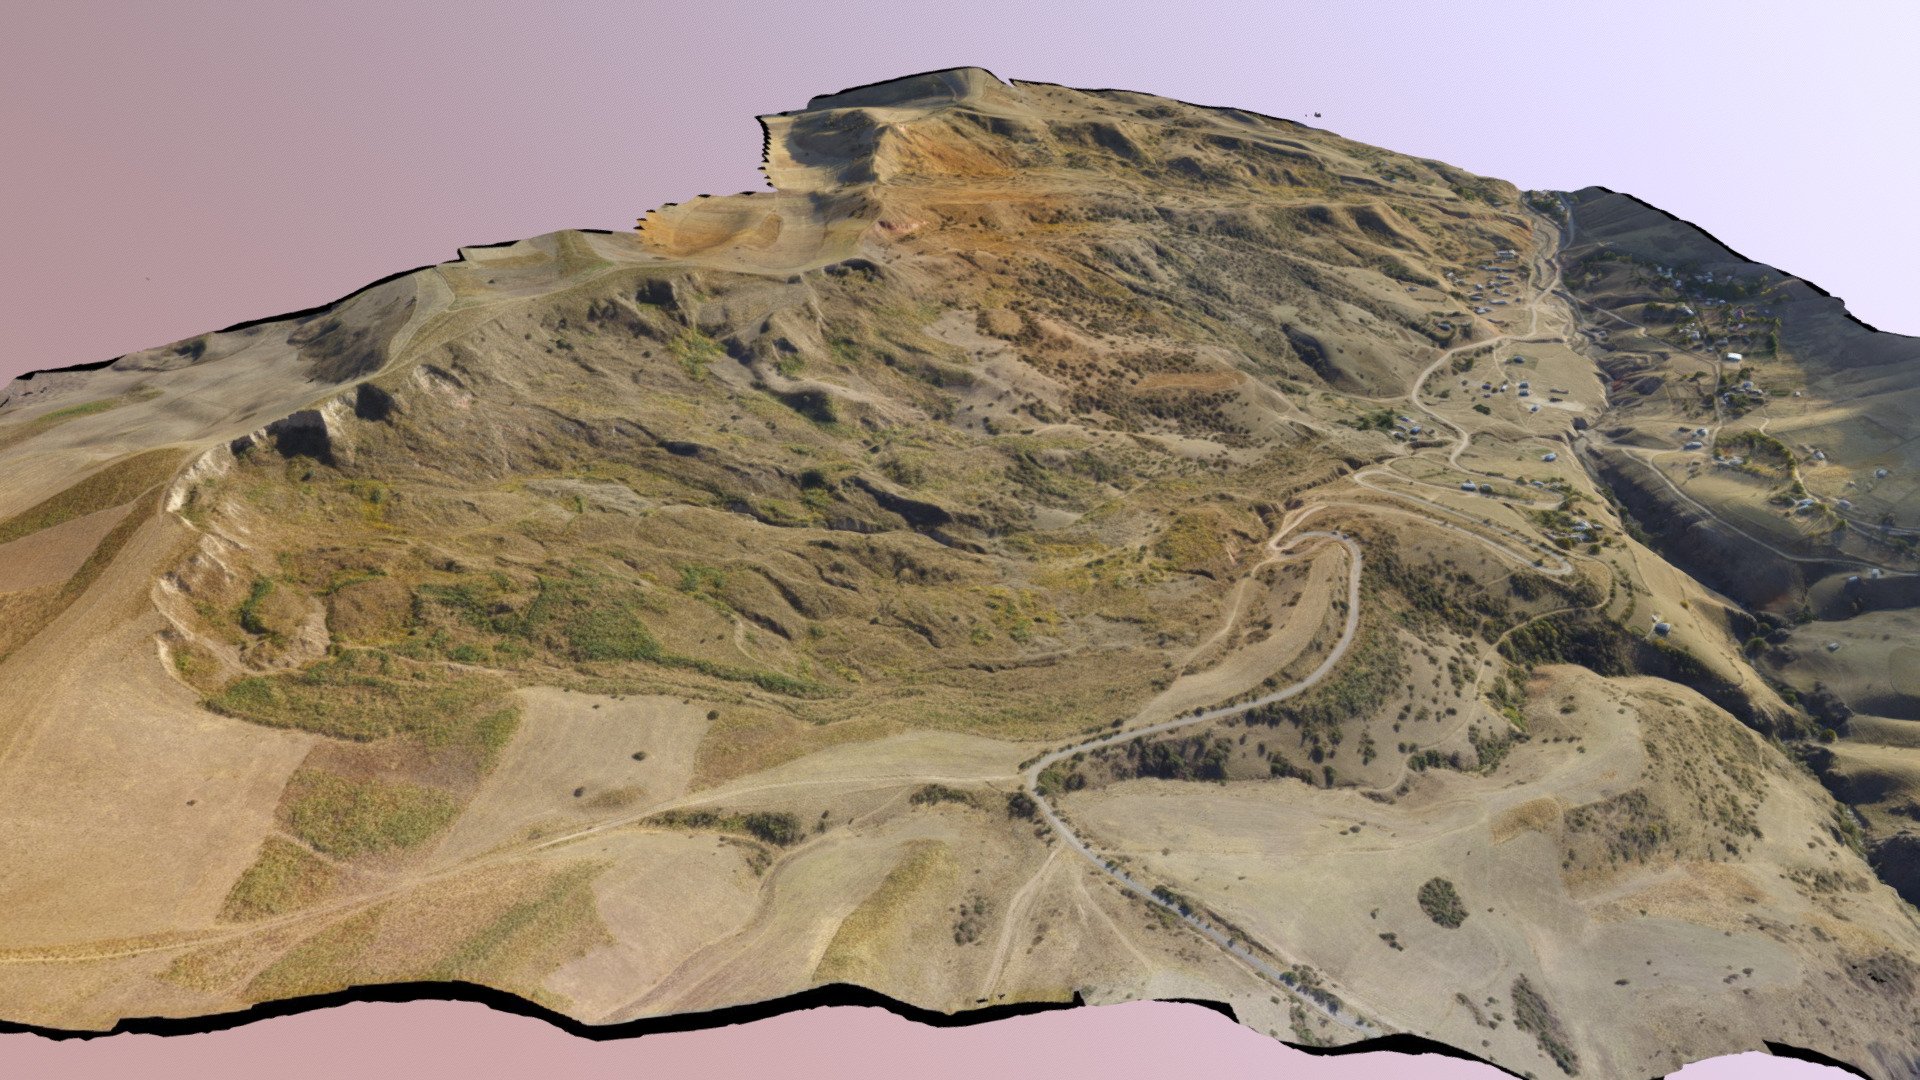 Landslides 3D models using DJI phantom 3/4 pro during two fieldcampaigns in 2016 and 2017 in Kyrgyzstan, Central Asia.
contact: behling@gfz-potsdam.de
https://www.gfz-potsdam.de/en/staff/robert-behling/sec14/ - changet_old - 3D model by sec14gfz 3d model